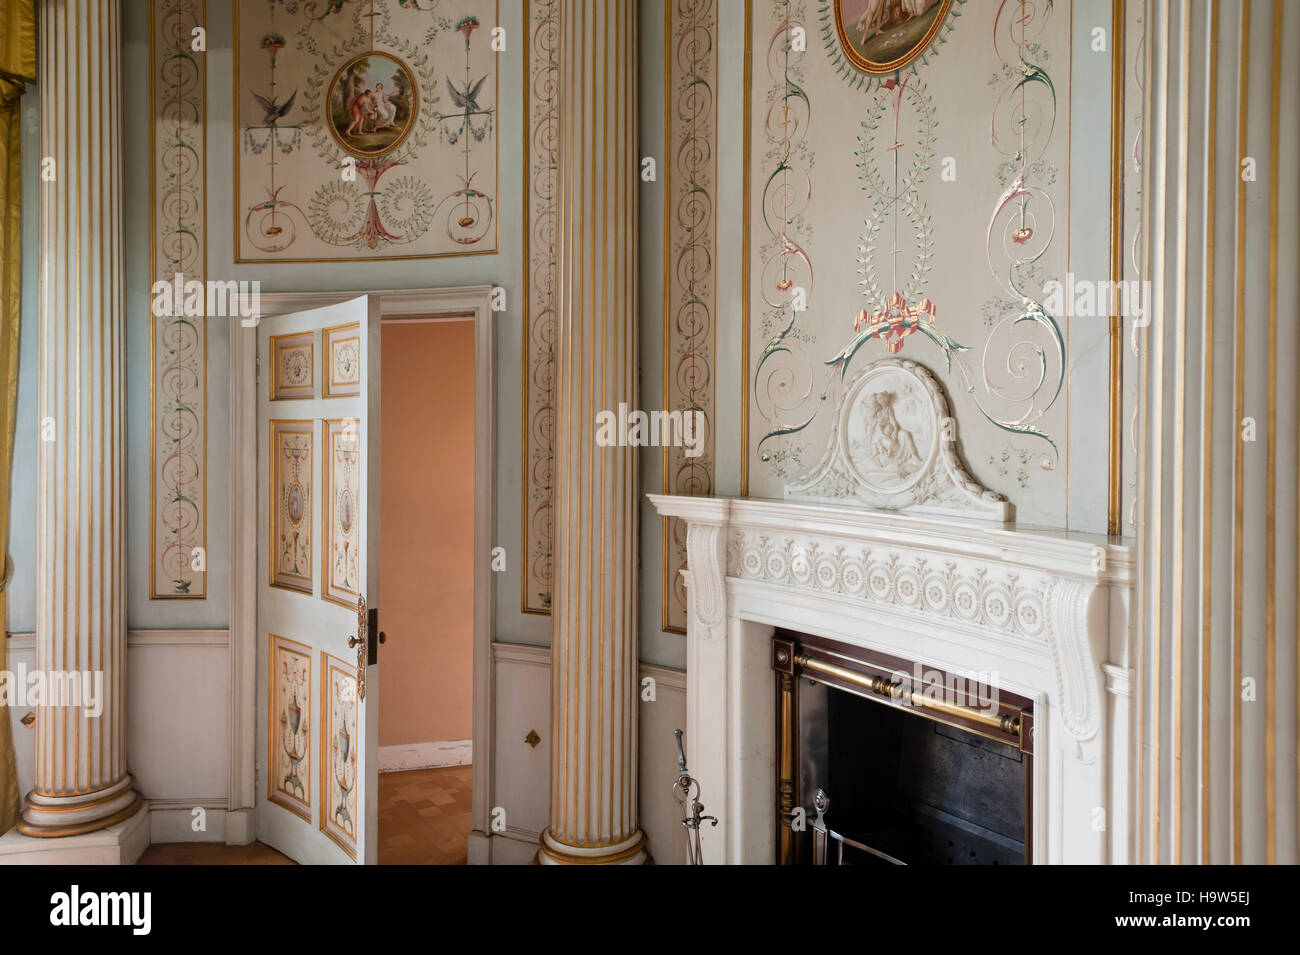 The Boudoir at Attingham Park, Shropshire. The Boudoir was designed by the architect Henry Holland in the 1780s. *** Local Caption *** Attingham Park Stock Photo